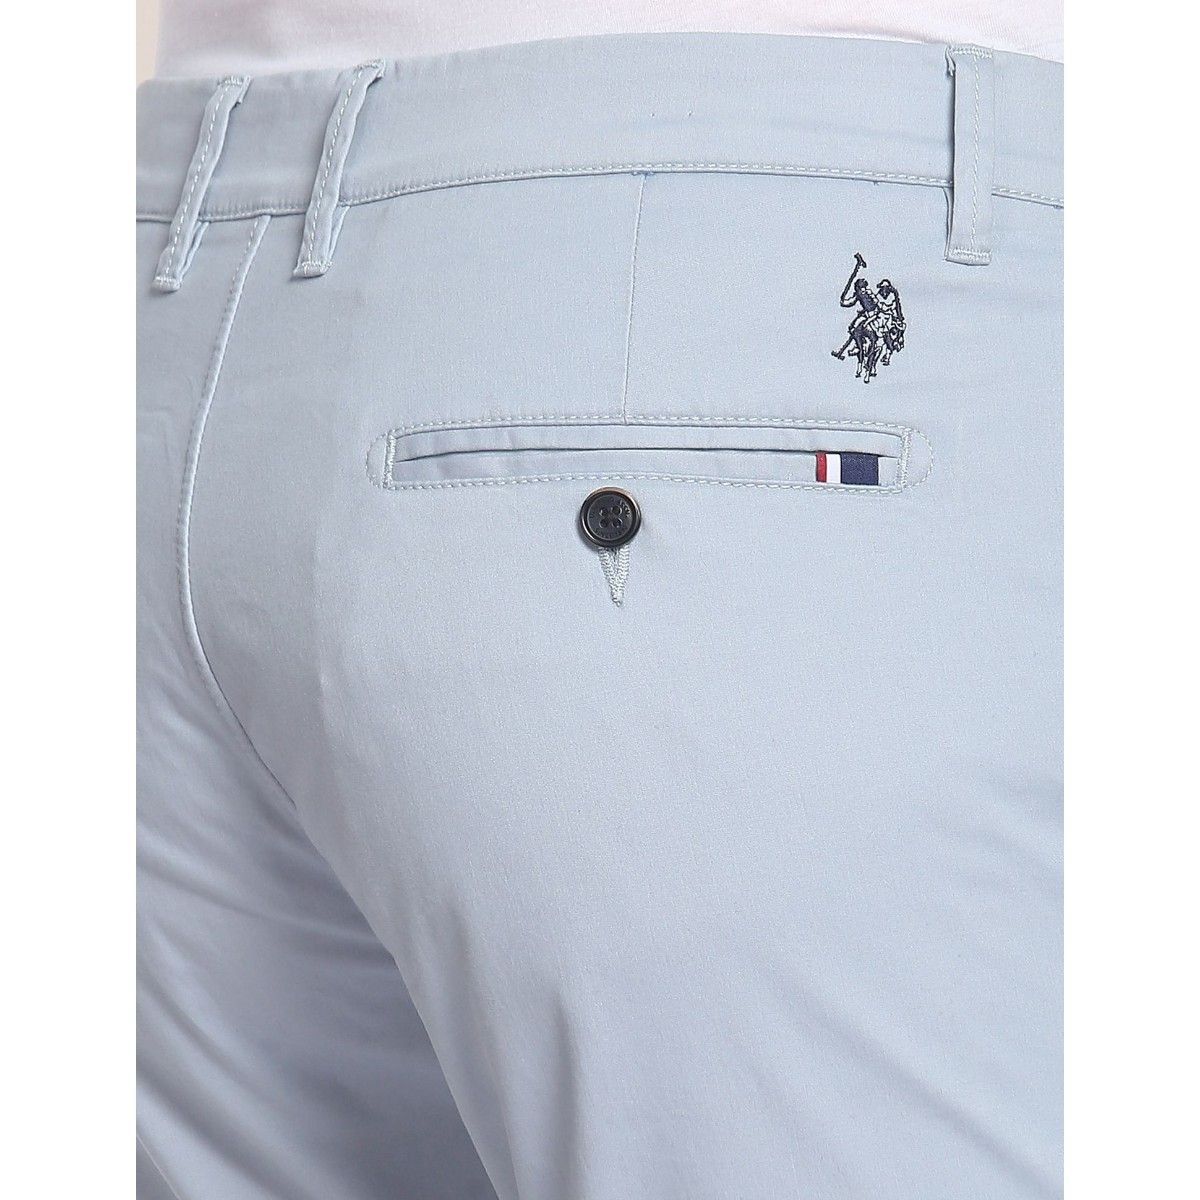 Buy U.S. Polo Assn. Cotton Stretch Slim Fit Trousers - NNNOW.com